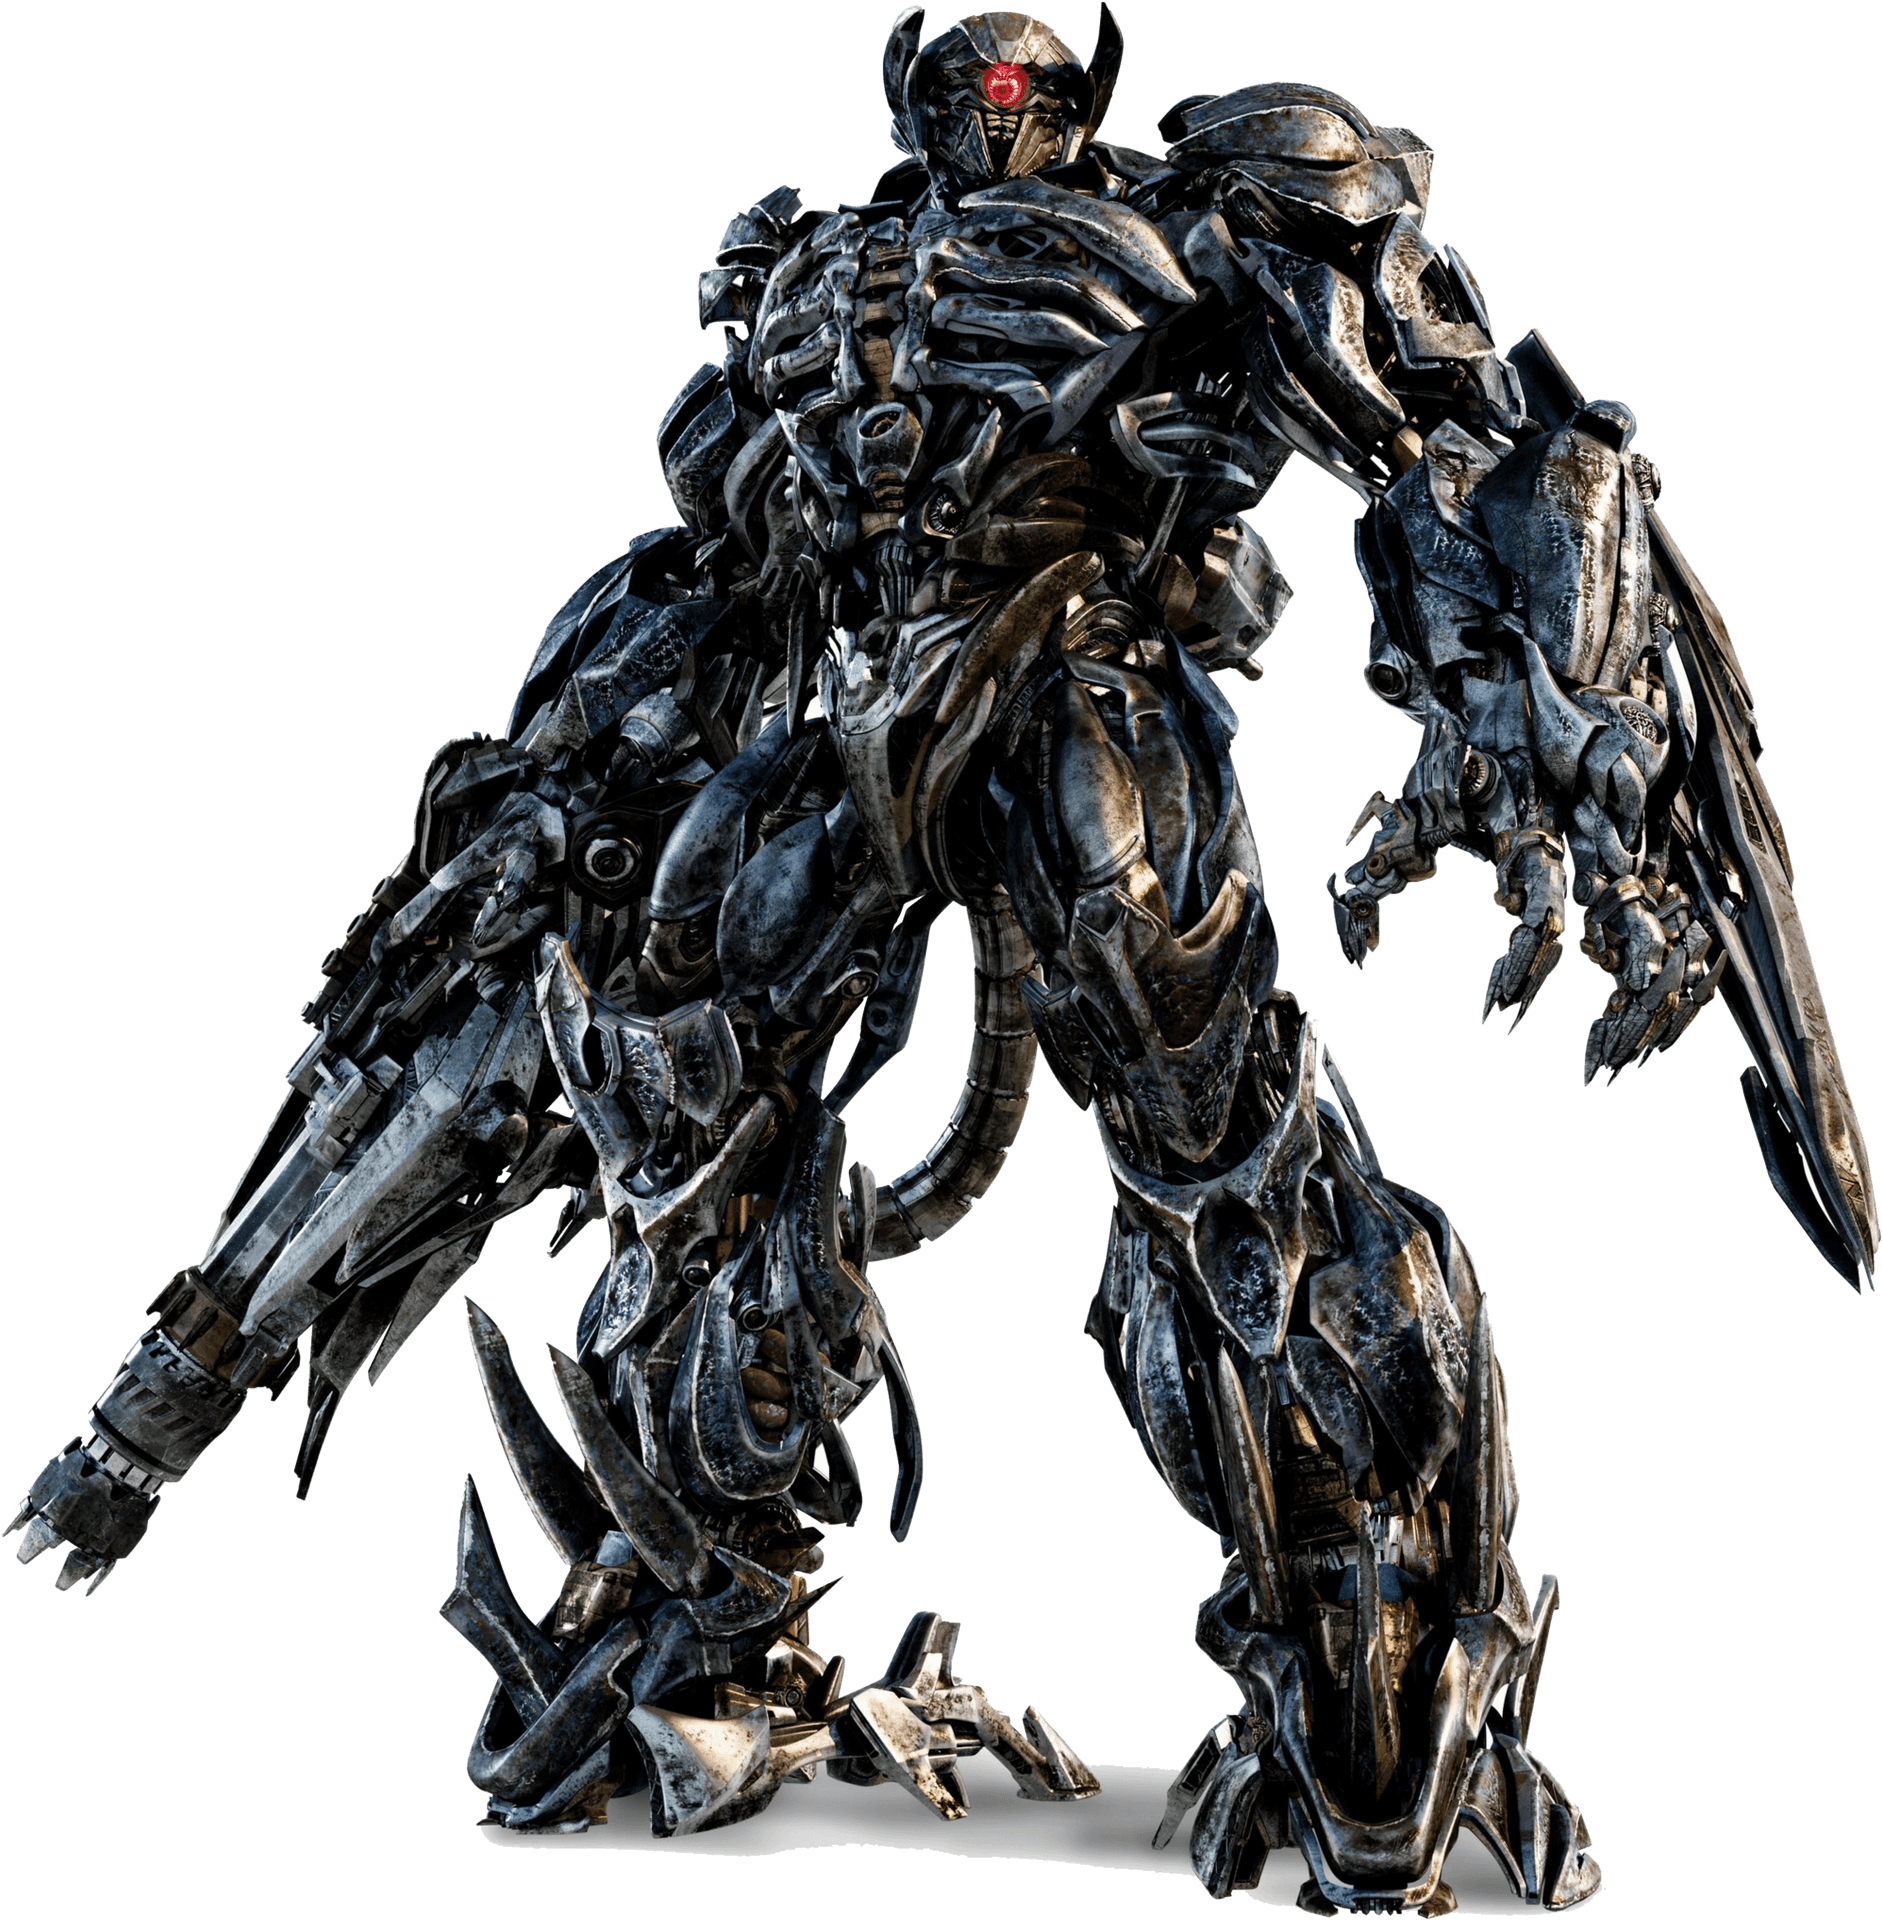 Transformers Decepticon Shockwave Standing PNG